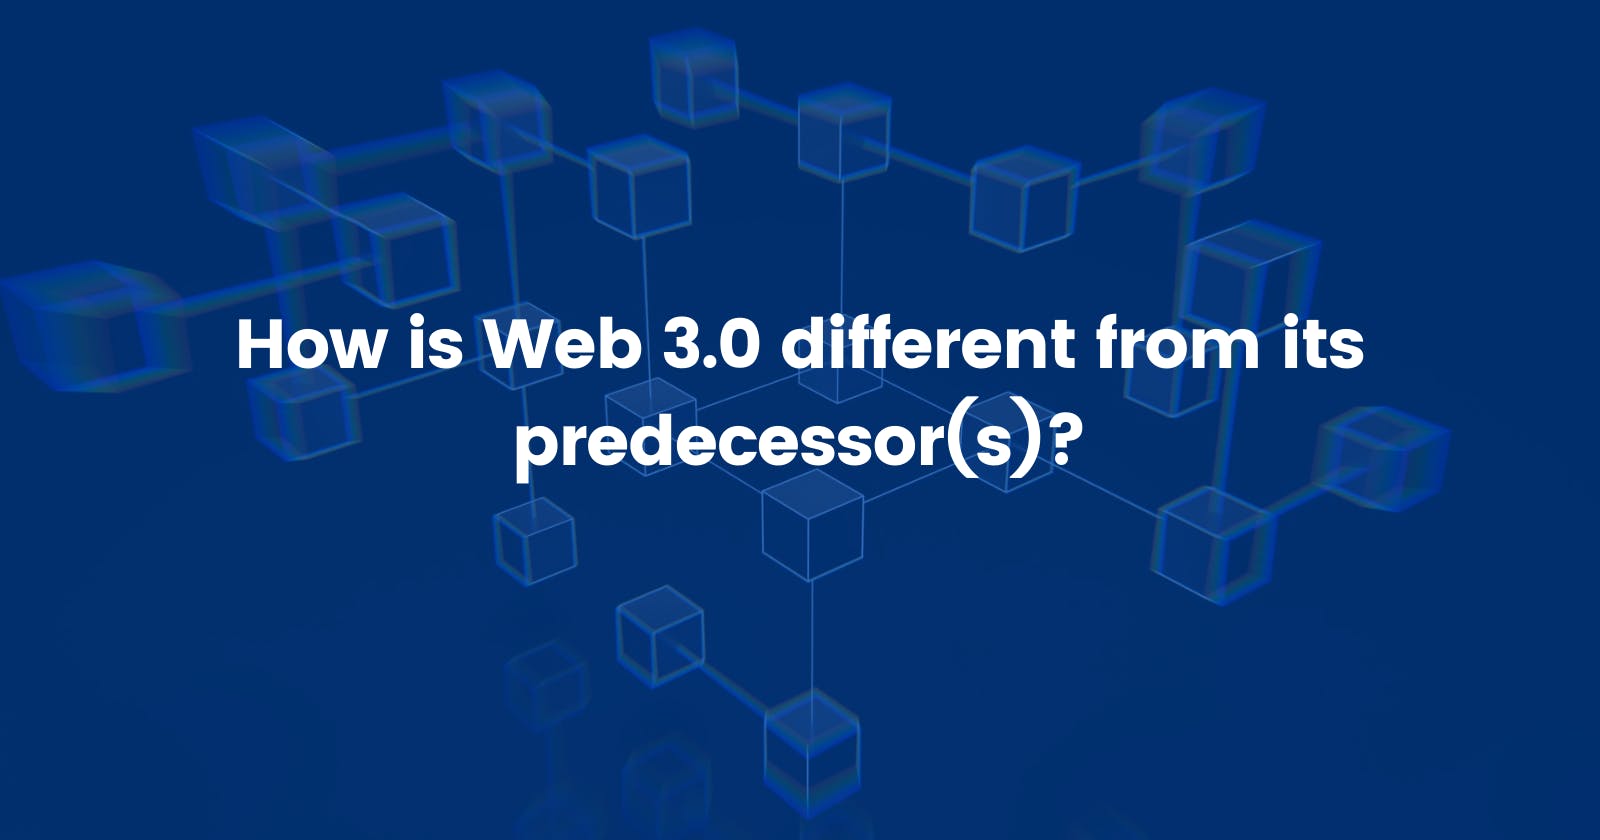 How is Web 3.0 different from its predecessor(s)?